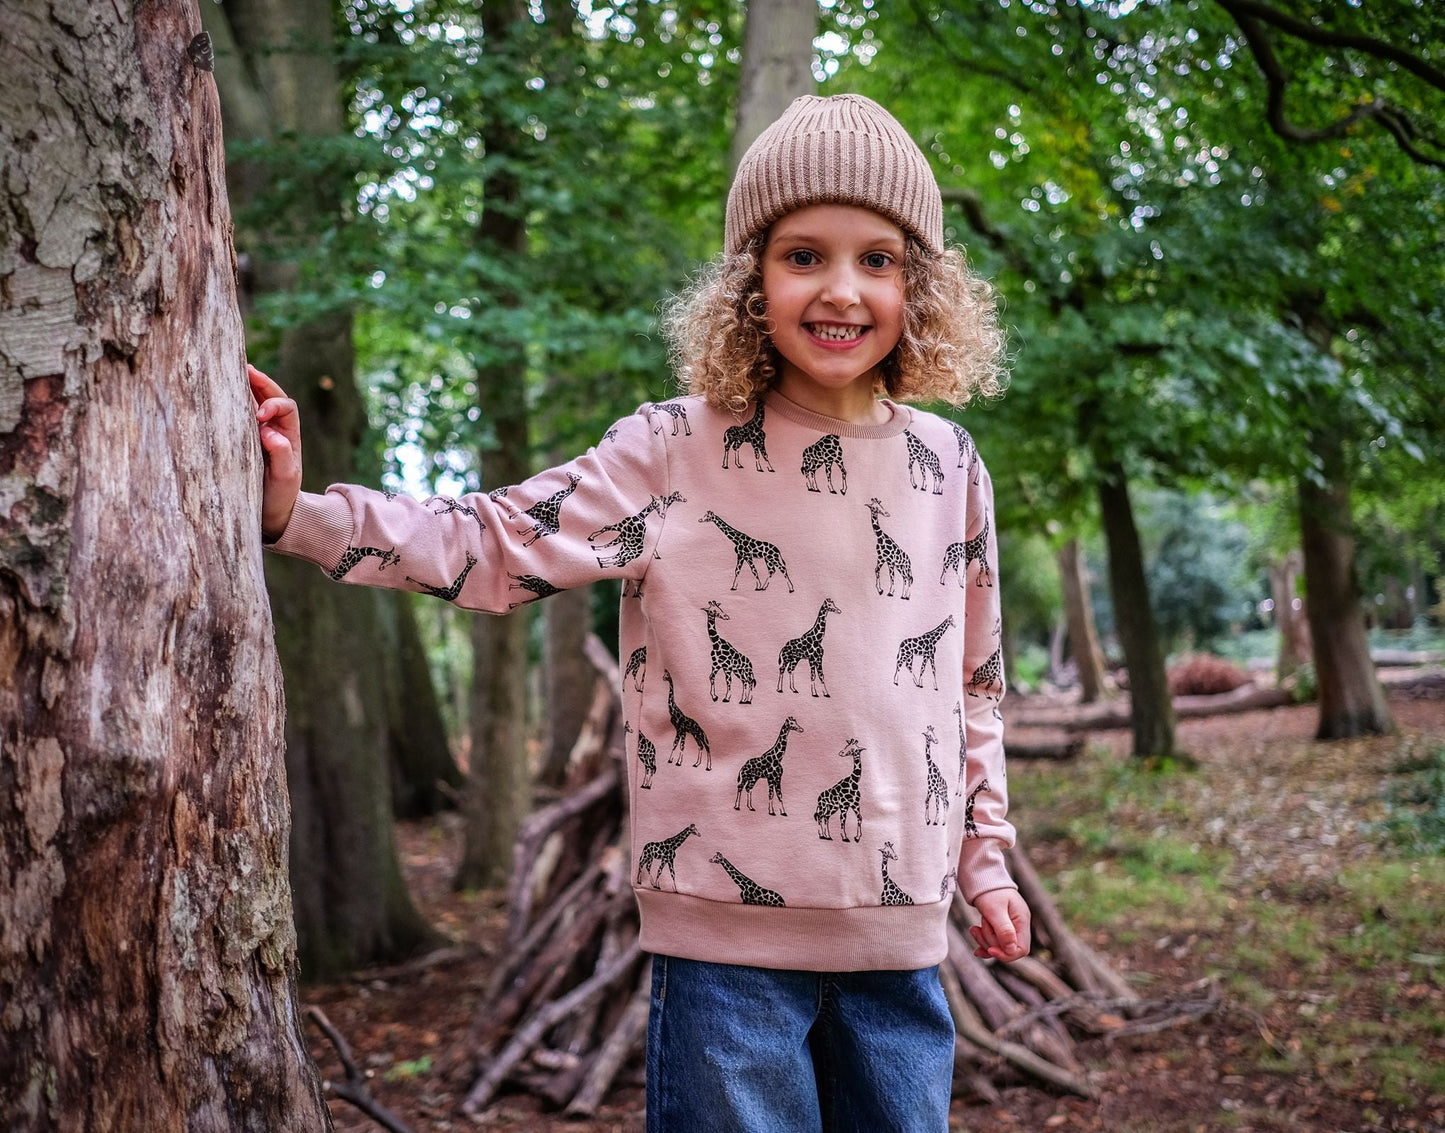 Lifestyle shot of a child wearing the sweatshirt. The background is an open, green woodland.